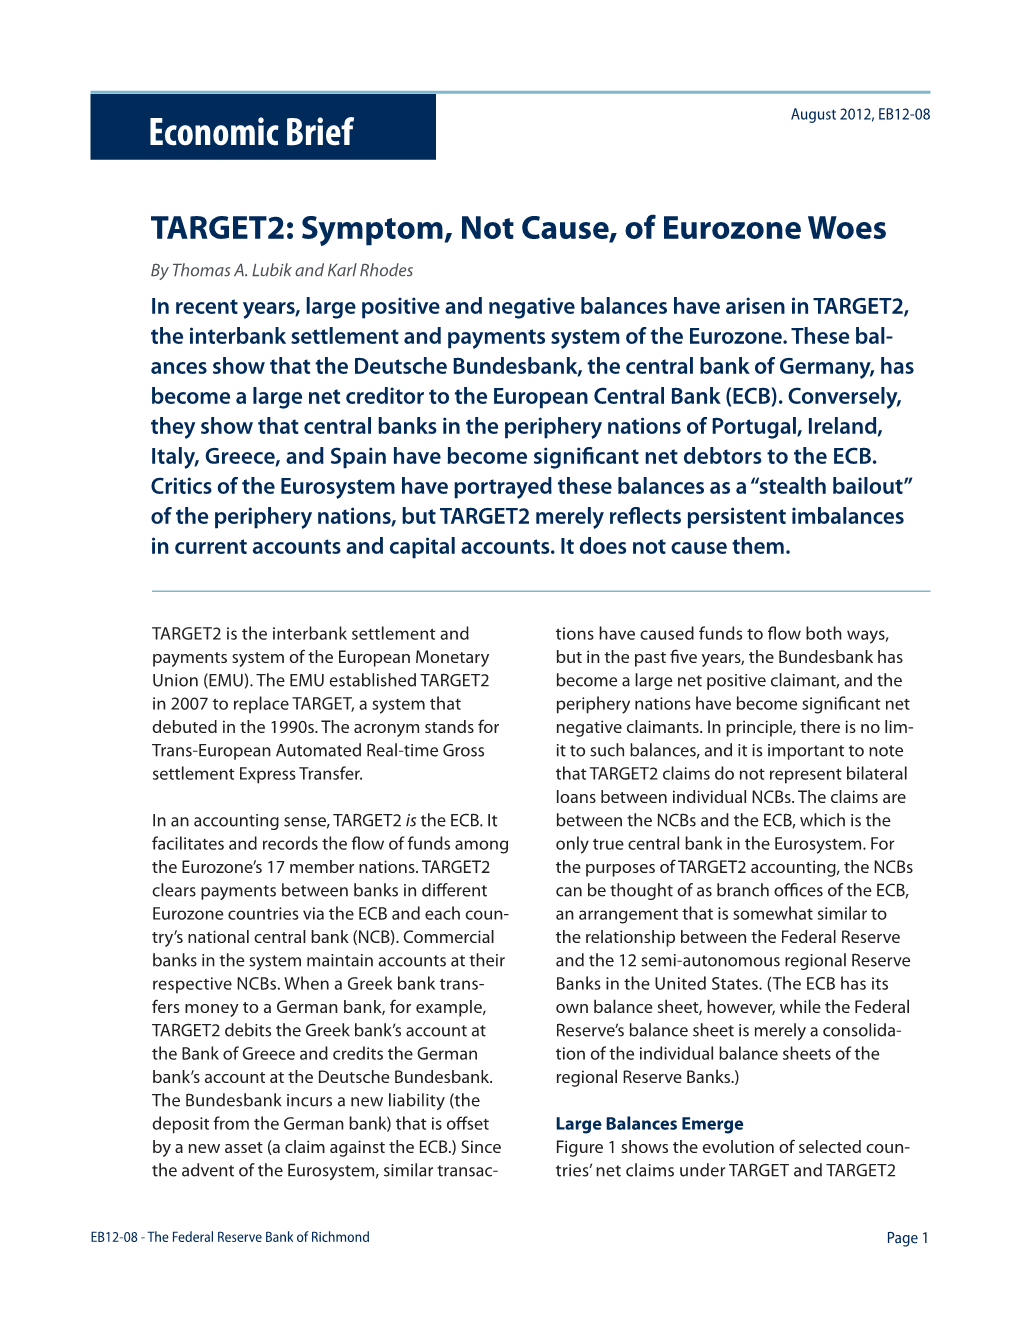 TARGET2: Symptom, Not Cause, of Eurozone Woes by Thomas A